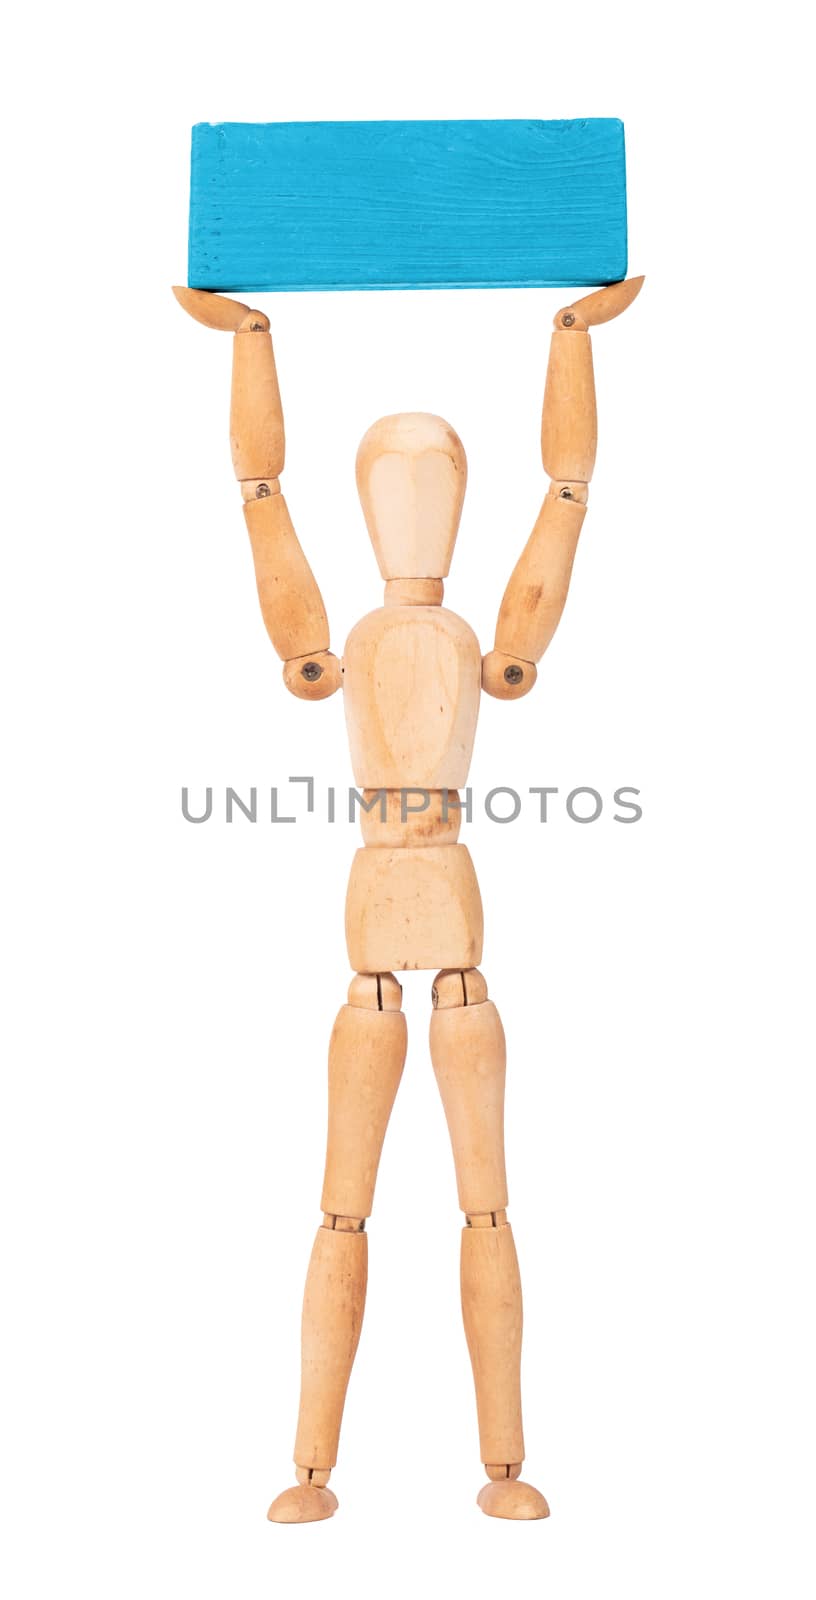 Wooden mannequin carrying a wooden block by michaklootwijk